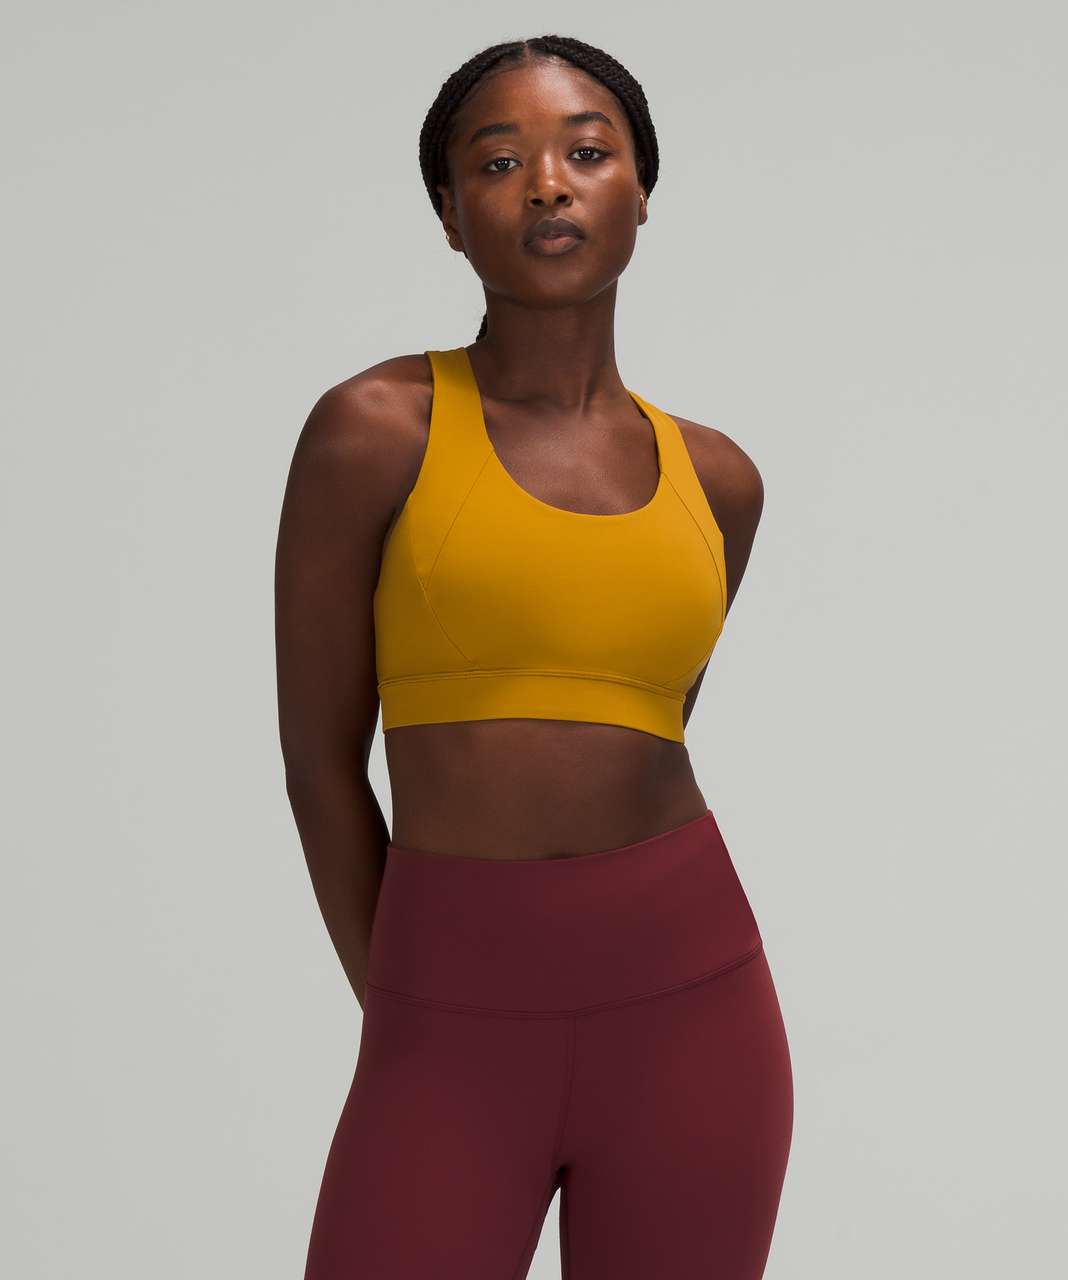 Lululemon Free To Be Elevated Bra *Light Support, DD/E Cup